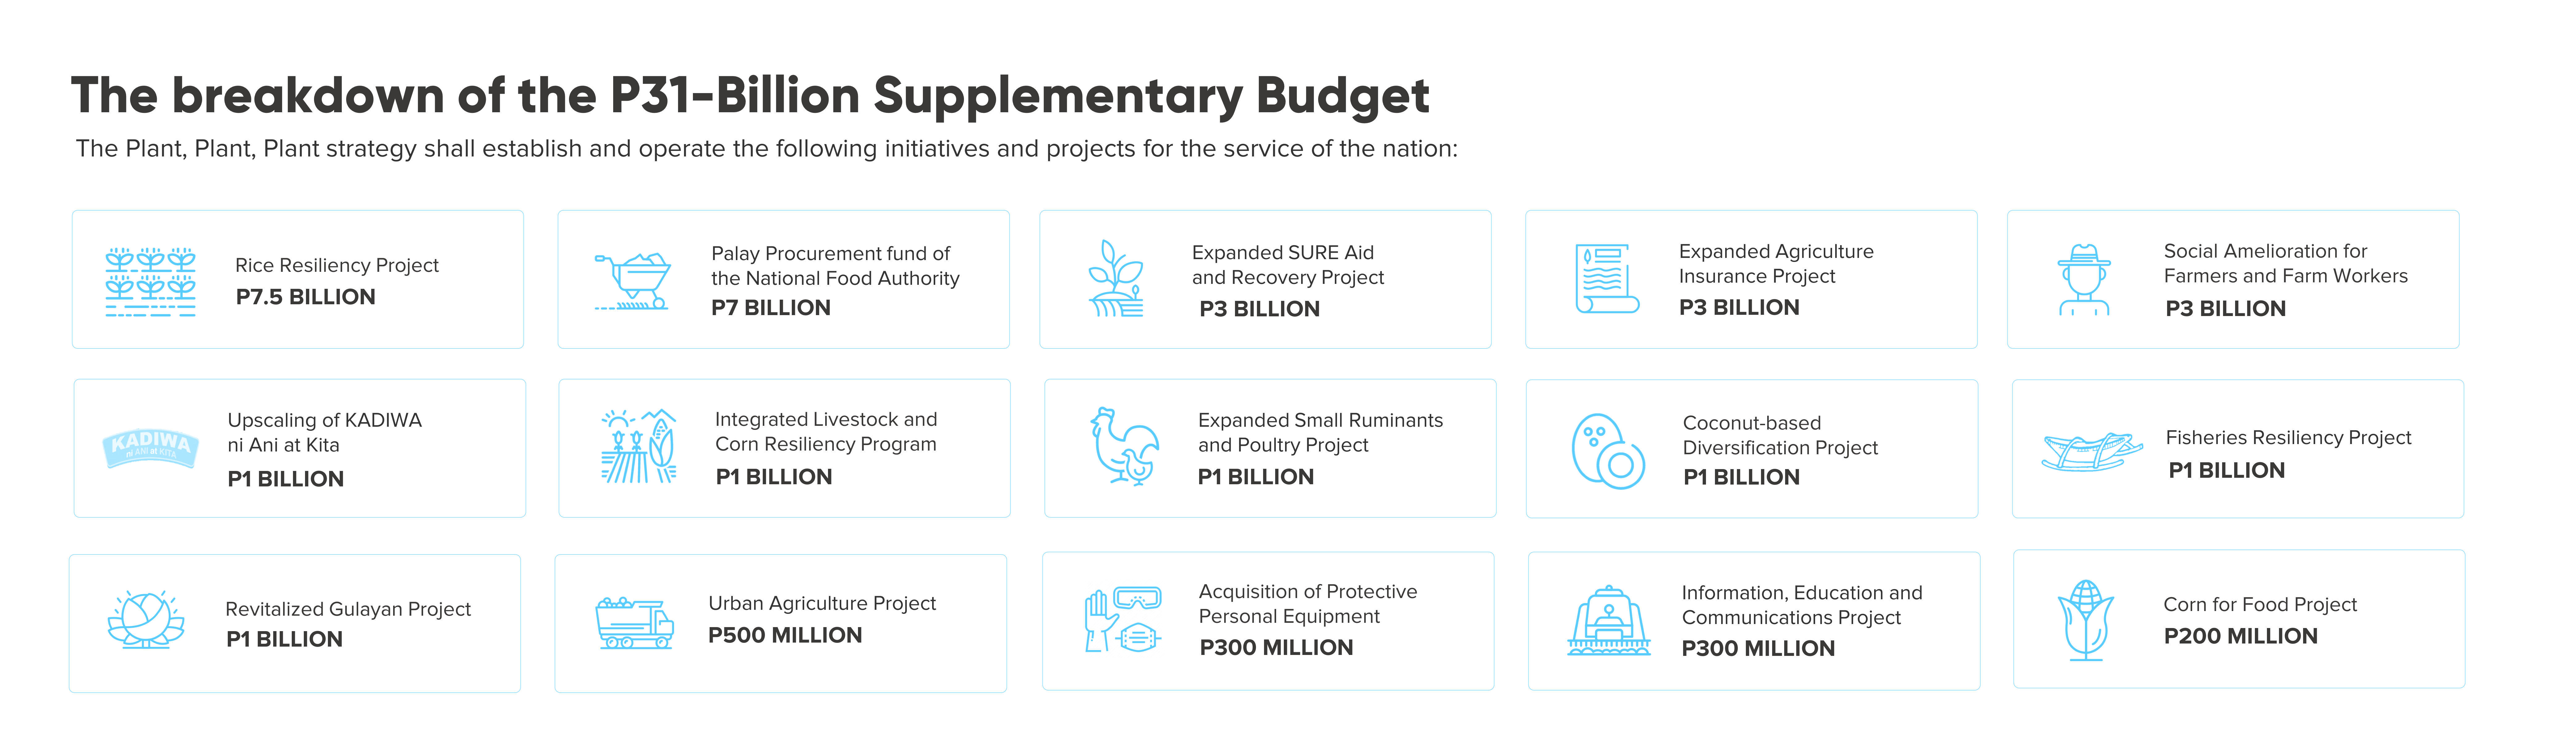 Breakdown of Department of Agriculture’s P31-billion Supplemental Budget